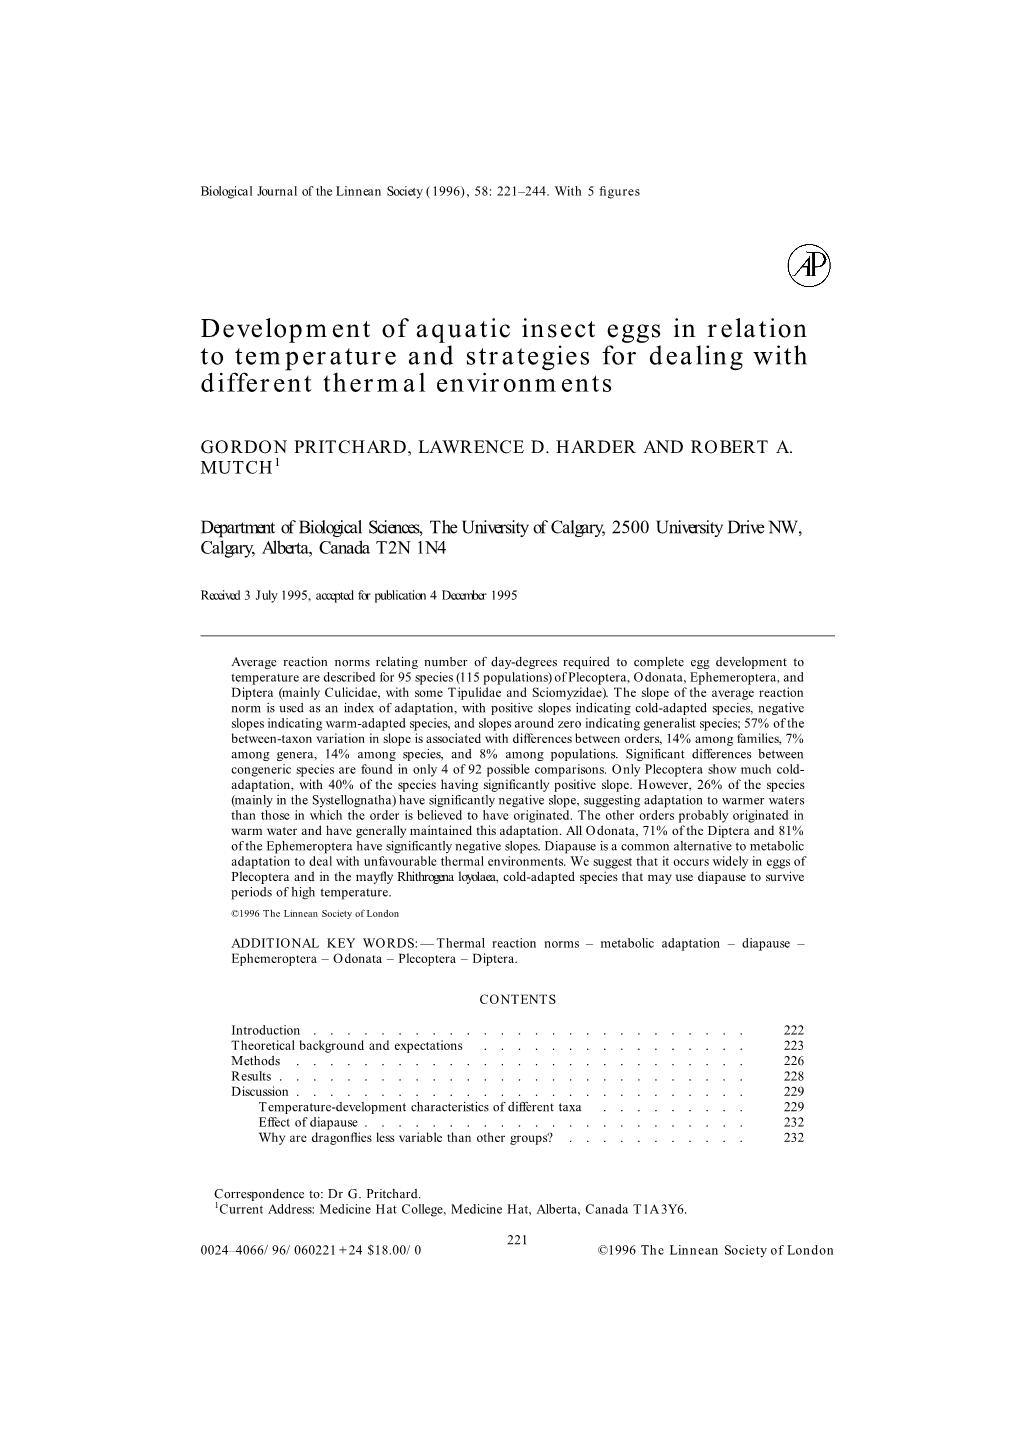 Development of Aquatic Insect Eggs in Relation to Temperature and Strategies for Dealing with Different Thermal Environments